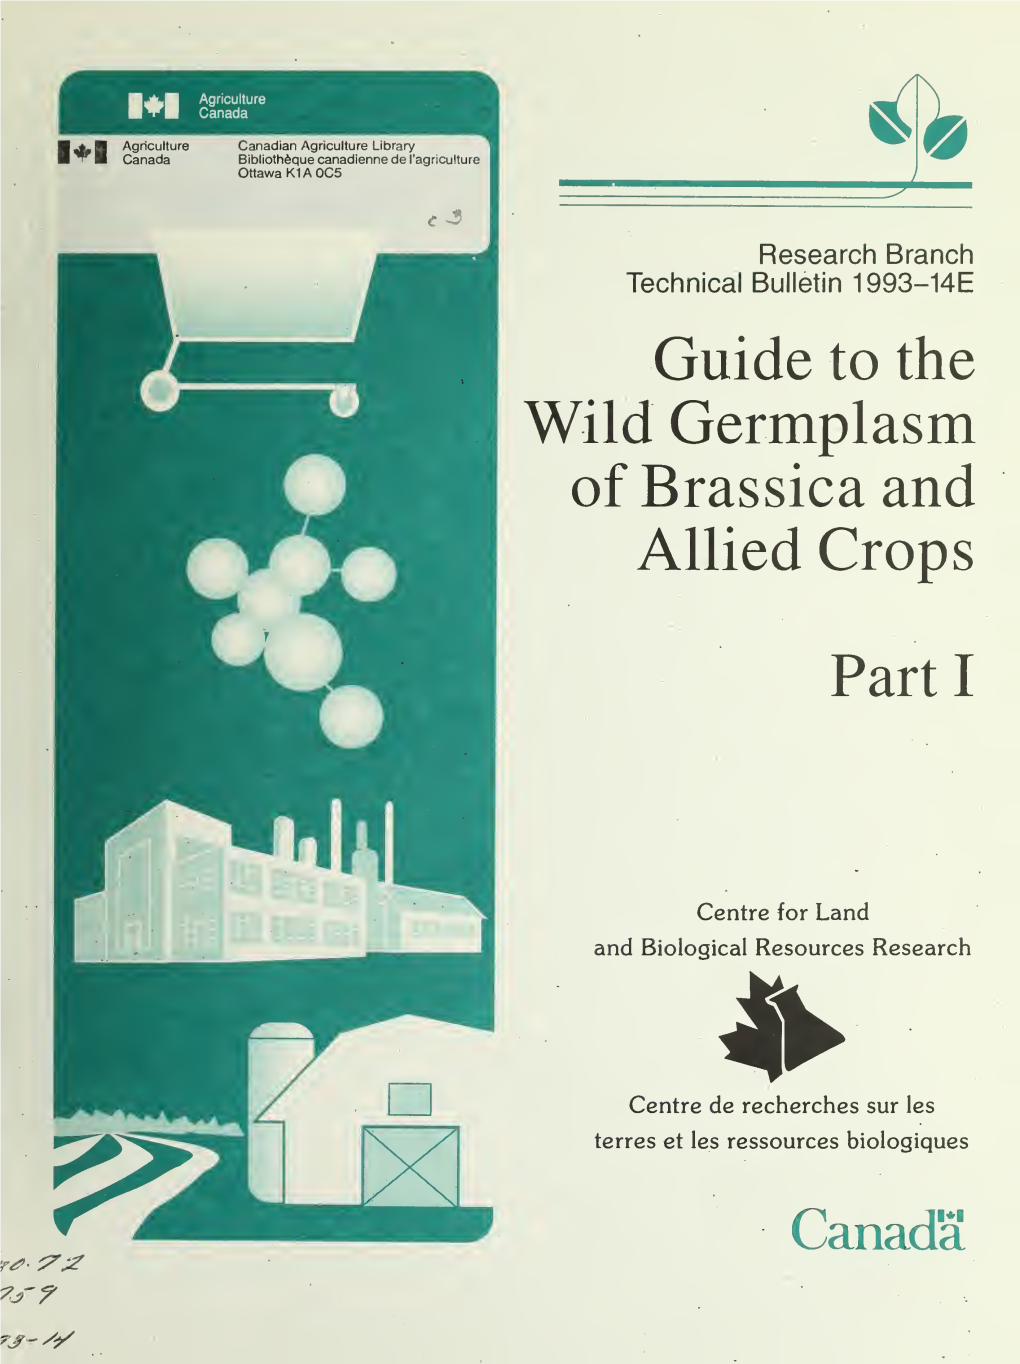 Guide to the Wild Germplasm of Brassica and Allied Crops